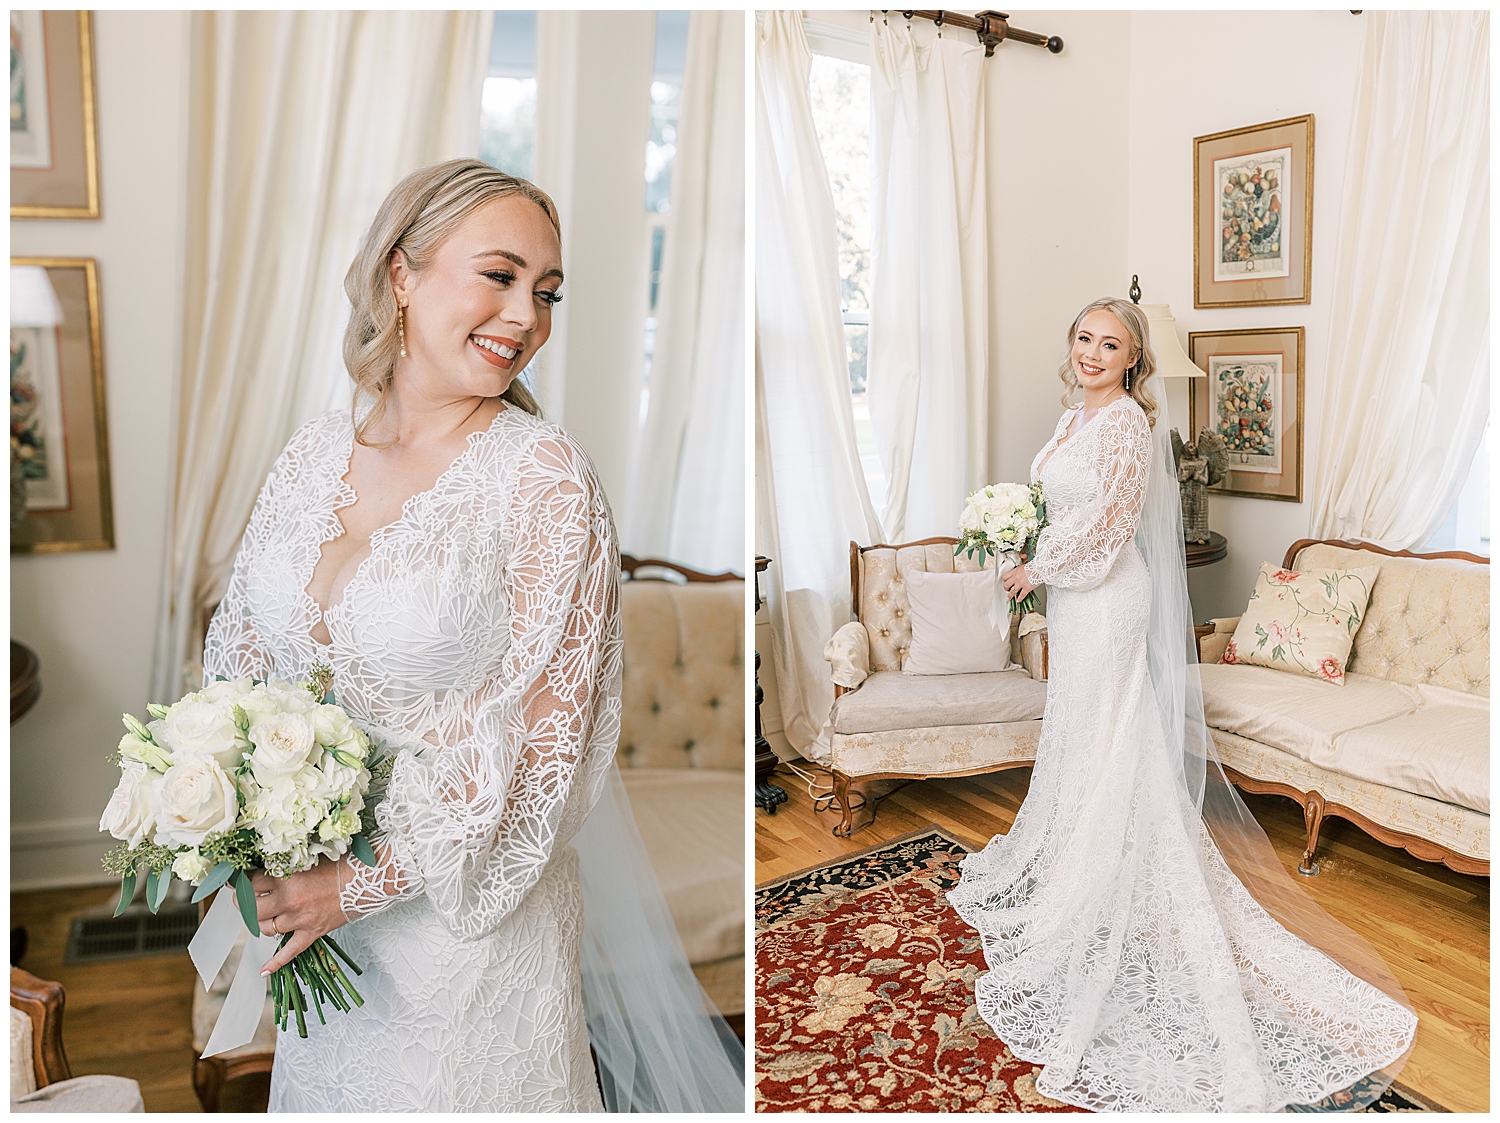 A bride laughs while standing inside The Bay Bed & Breakfast.